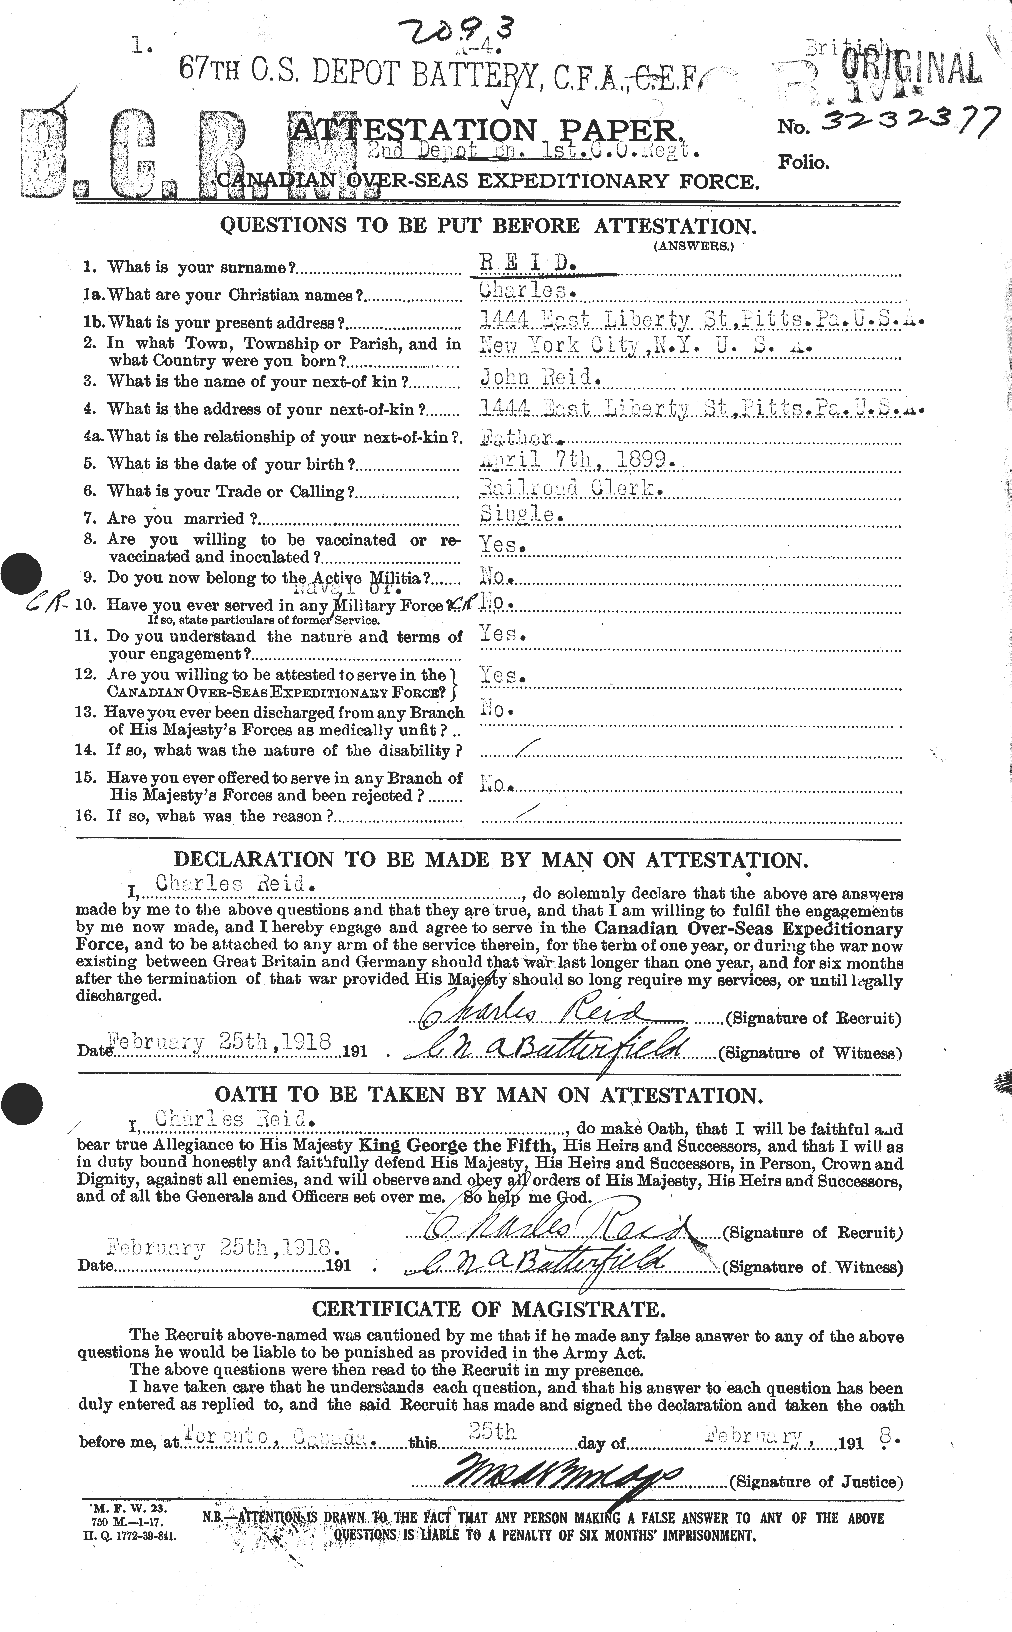 Personnel Records of the First World War - CEF 597869a